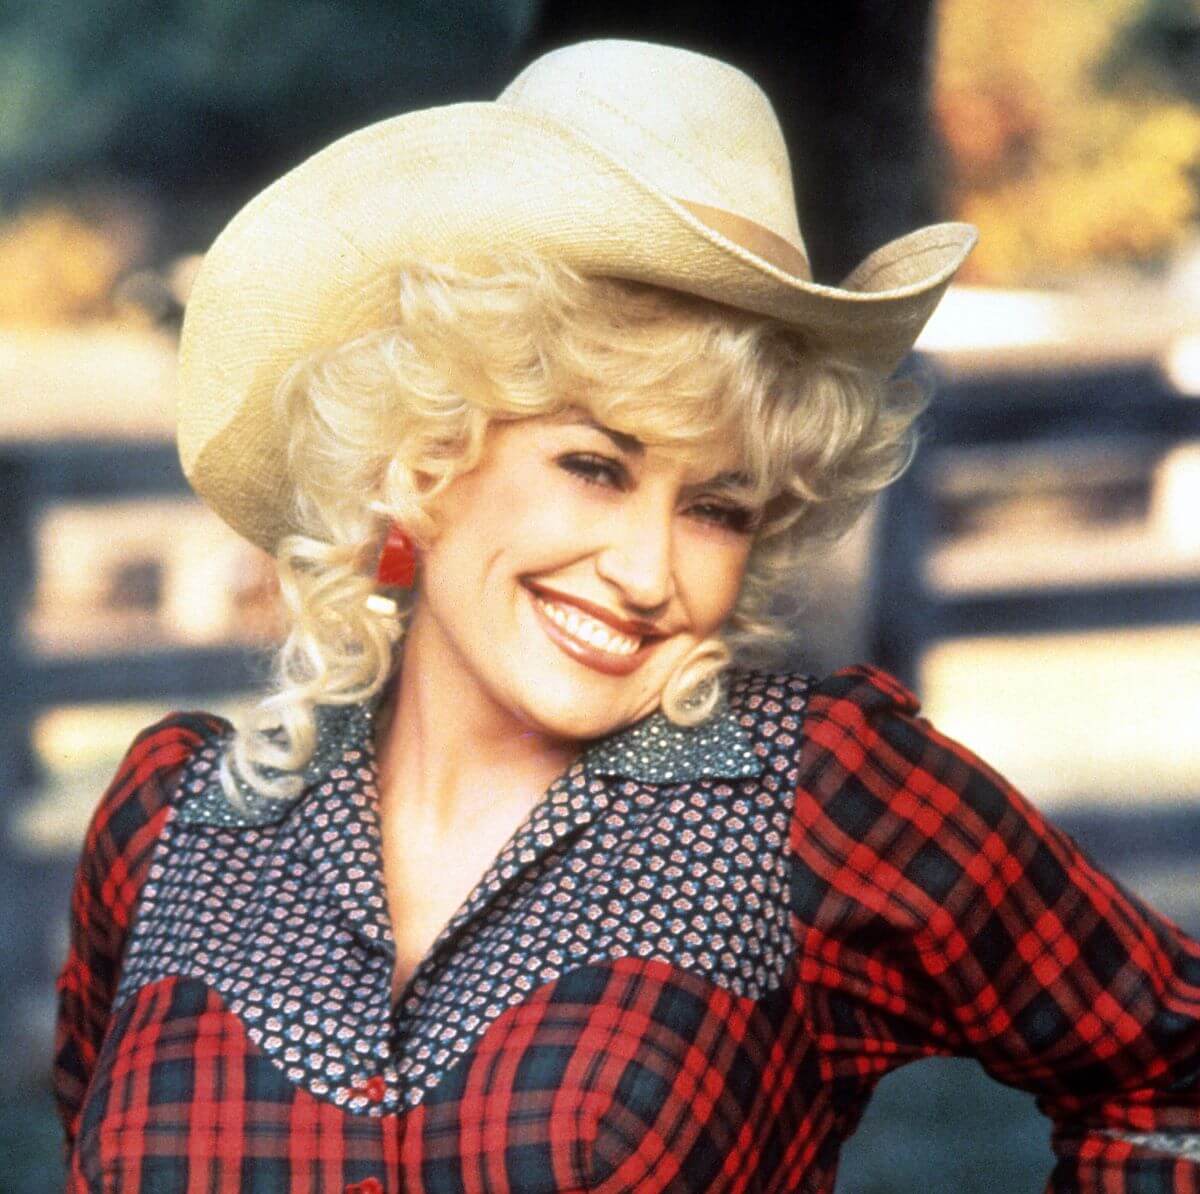 Dolly Parton wears a flannel shirt and a cowboy hat. She stands outside with one hand on her hip.